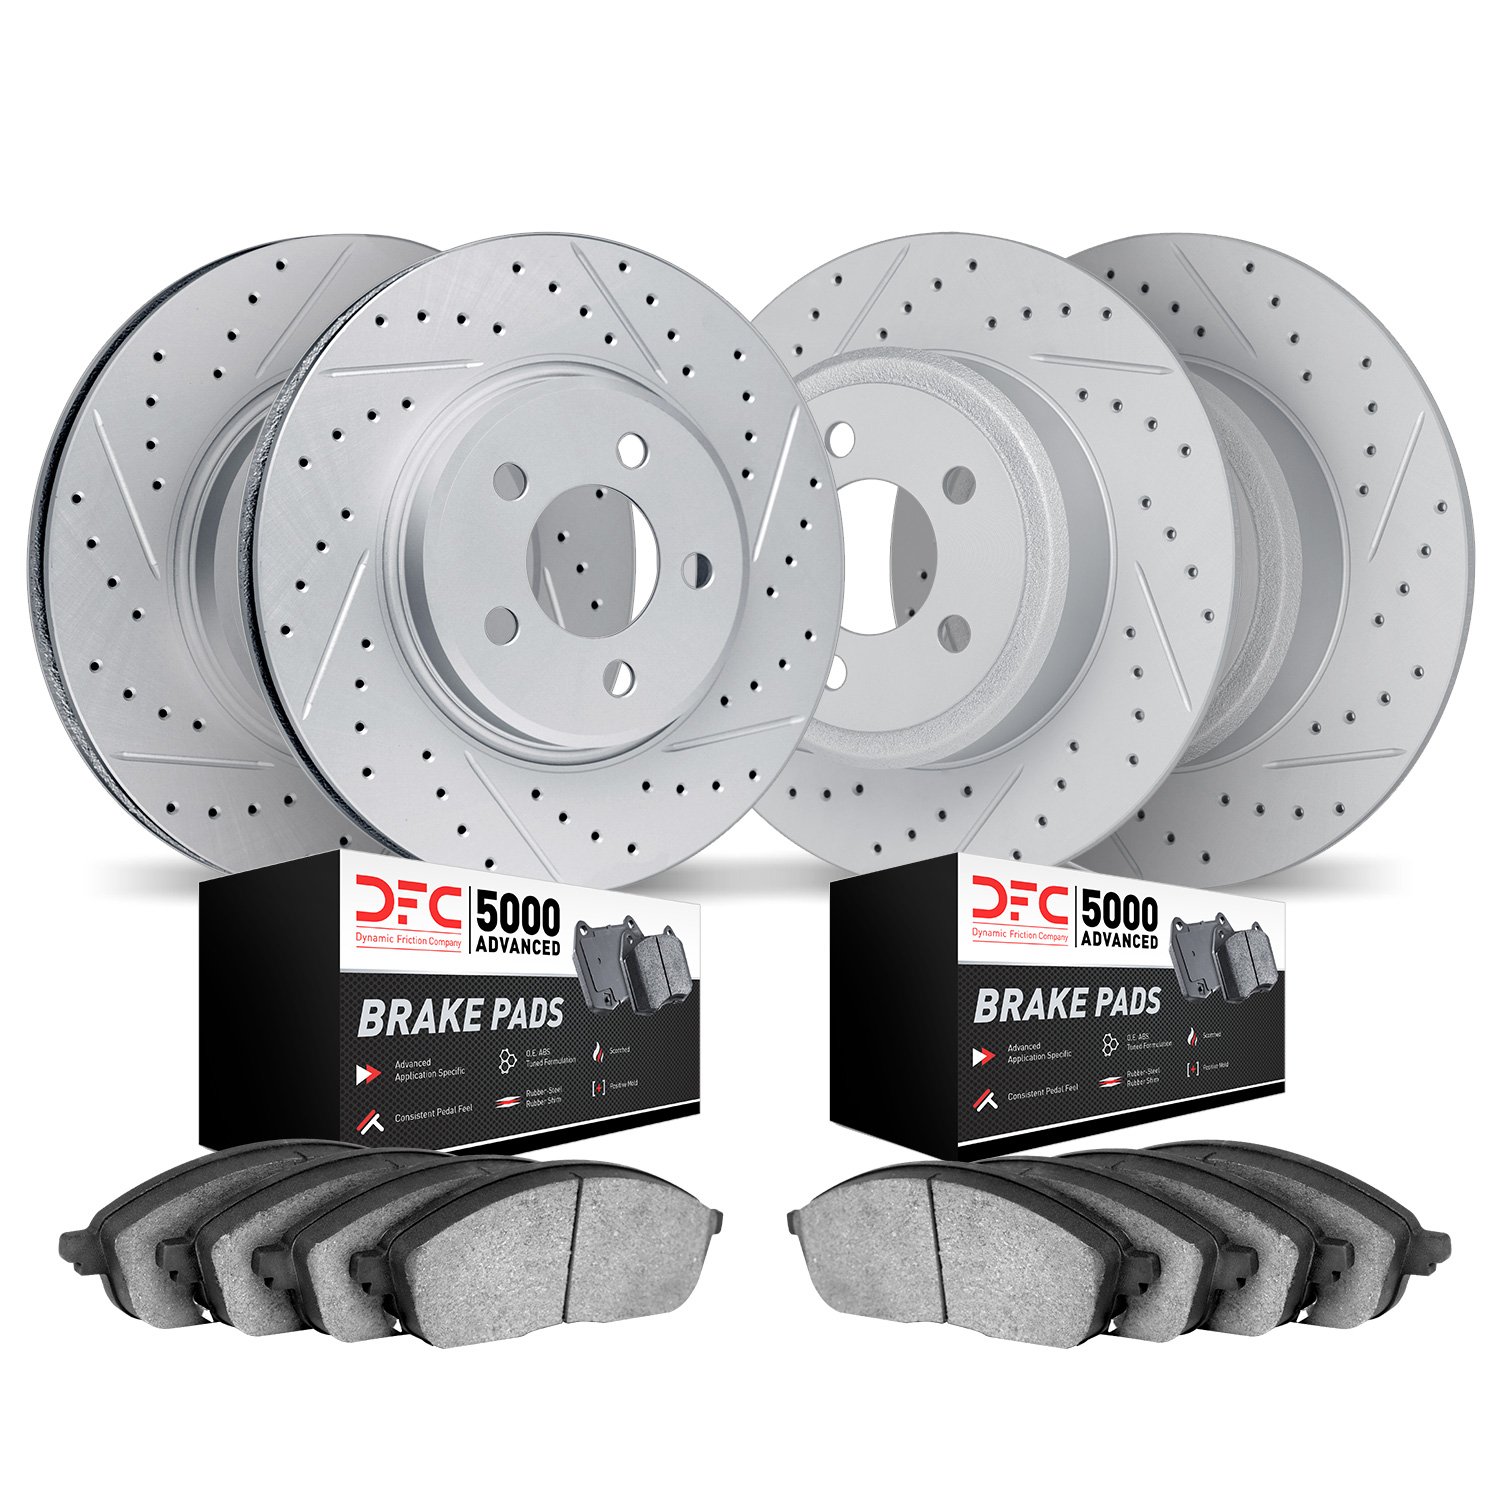 2504-27015 Geoperformance Drilled/Slotted Rotors w/5000 Advanced Brake Pads Kit, Fits Select Volvo, Position: Front and Rear